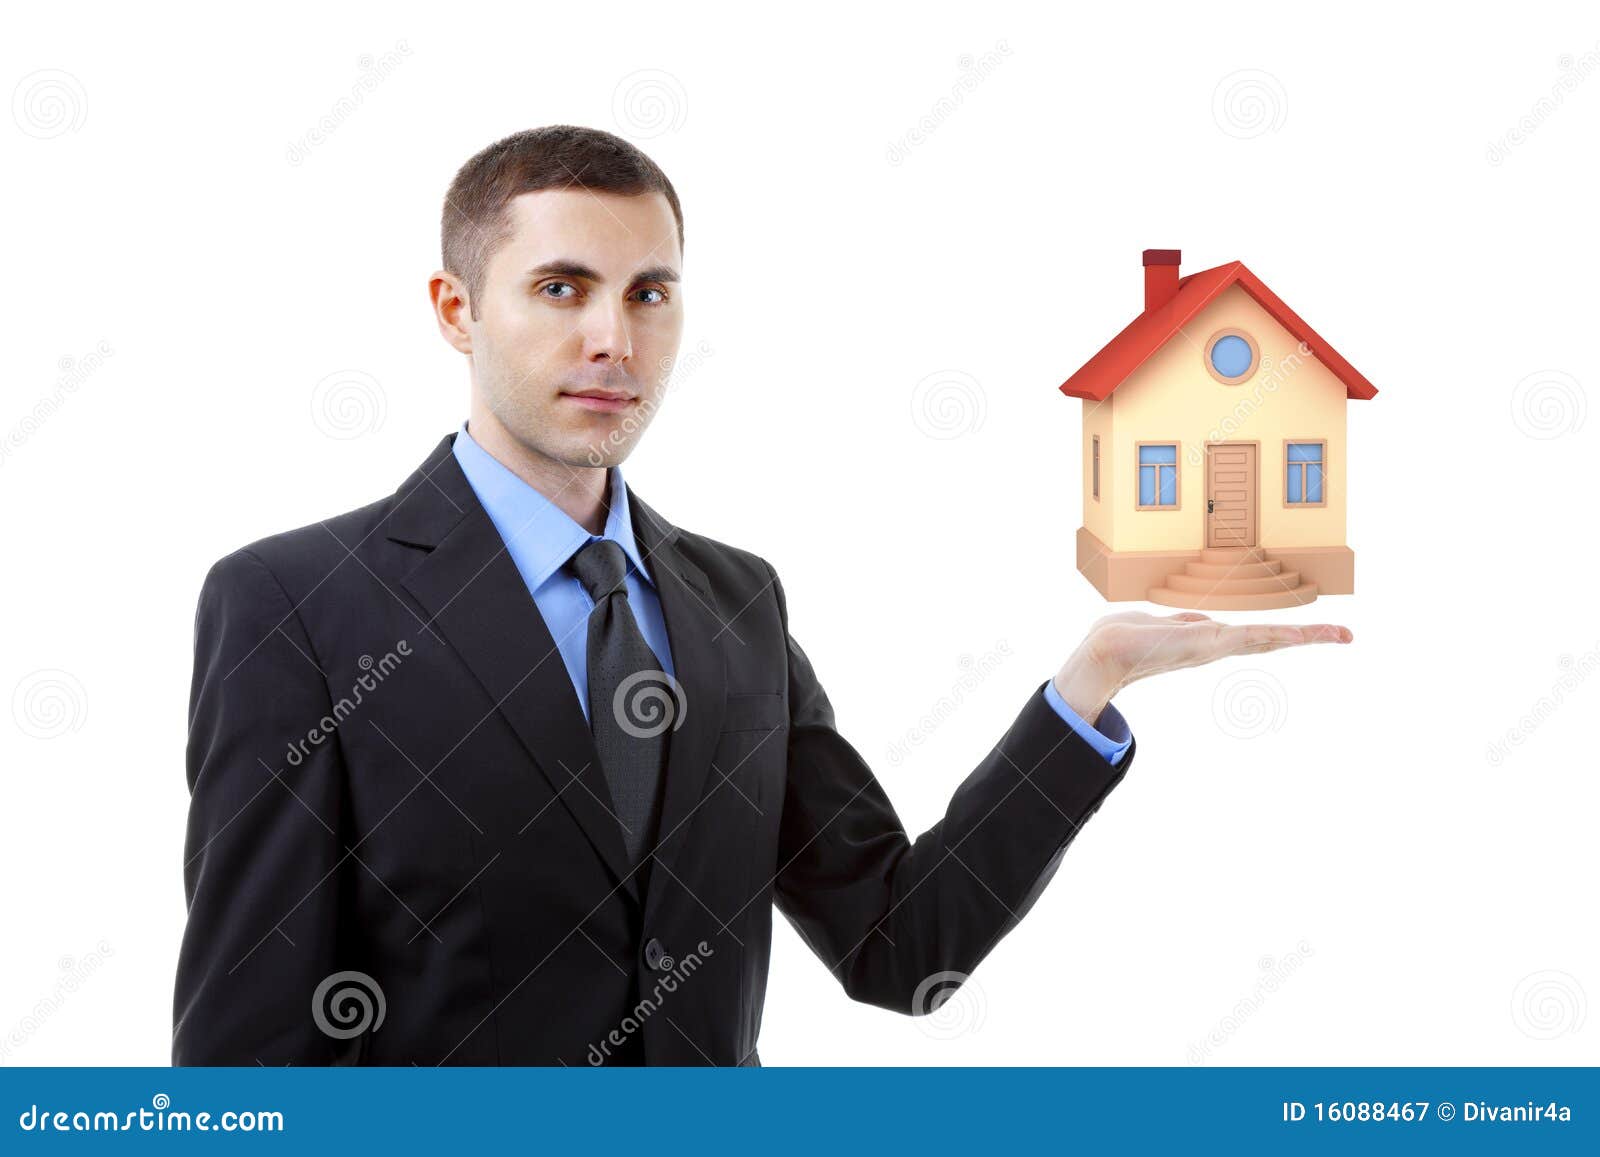 Real Estate Agent Royalty Free Stock Photography  Image: 16088467